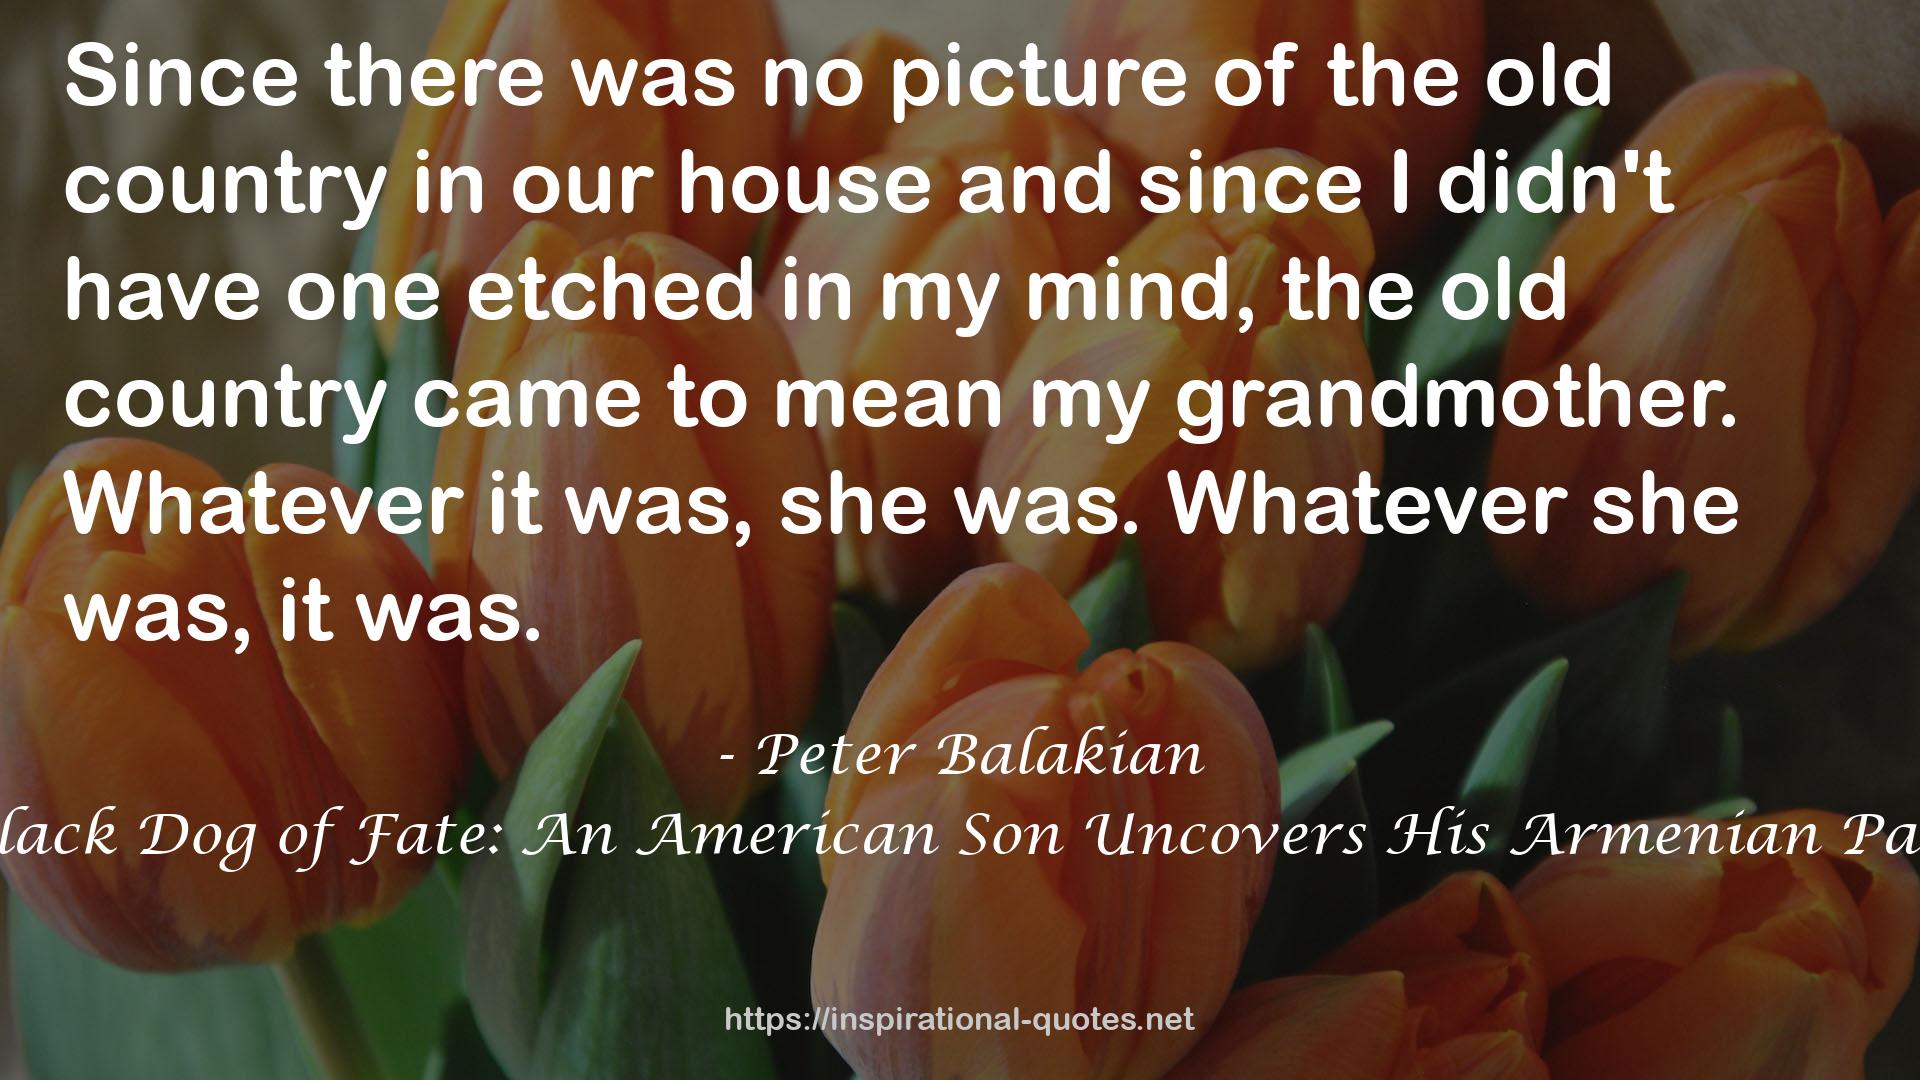 Black Dog of Fate: An American Son Uncovers His Armenian Past QUOTES